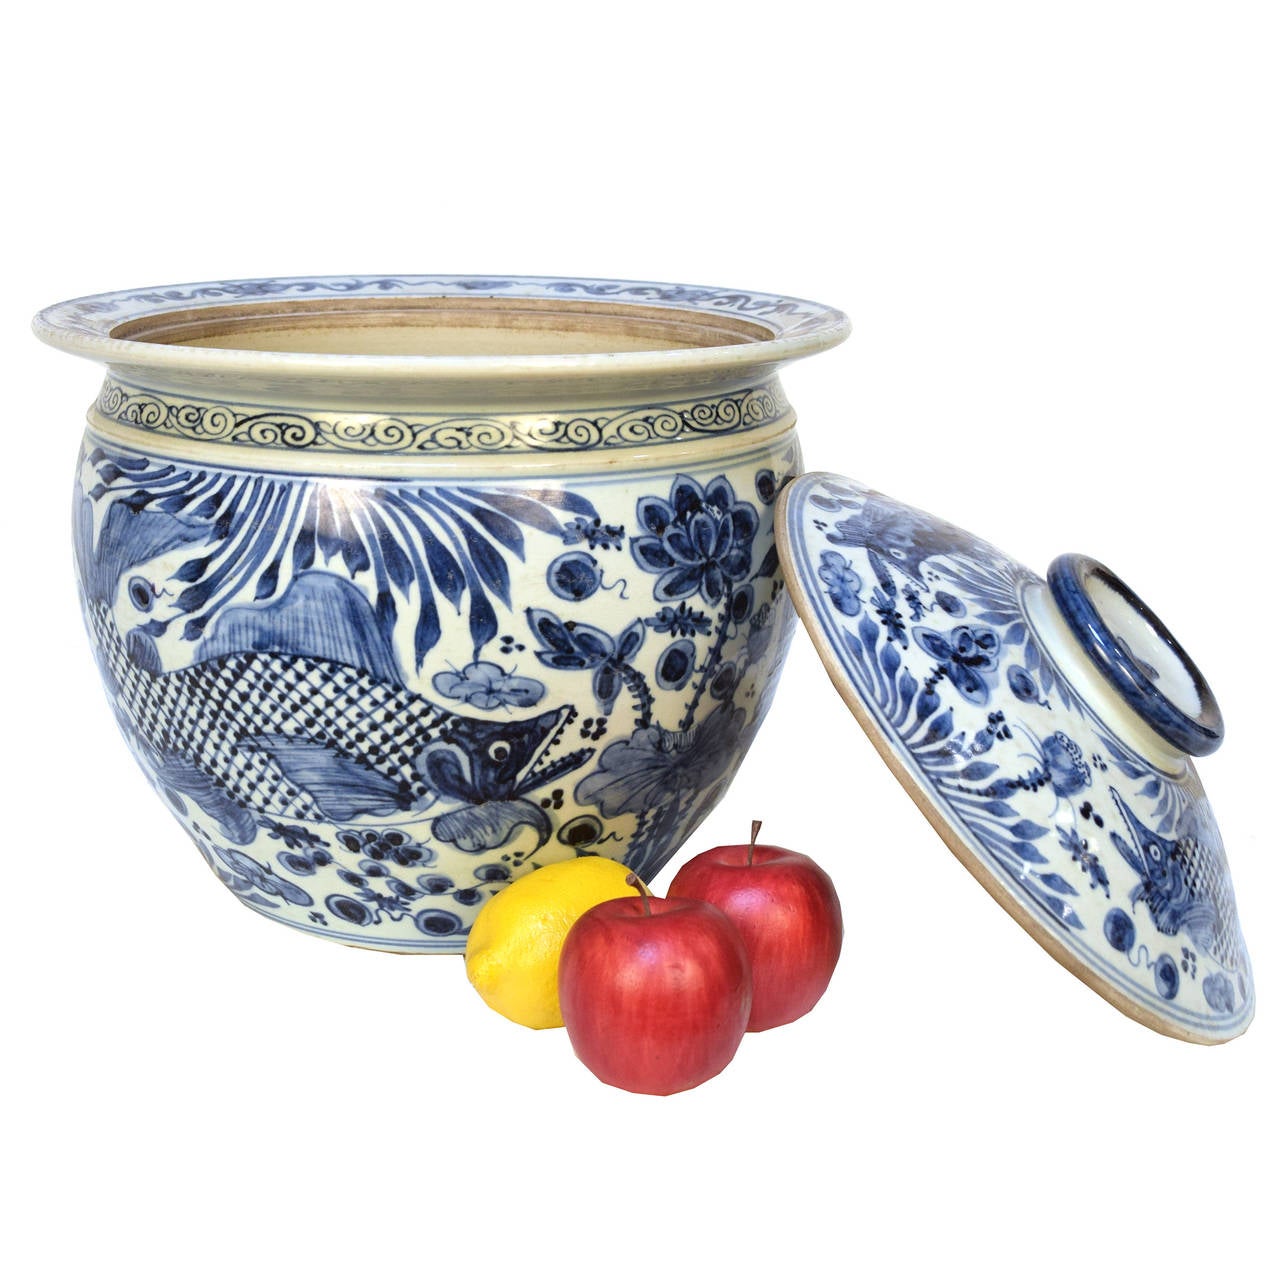 A wide mouth blue and white jar with a lid from Beijing, China with a painted a fish motif.

